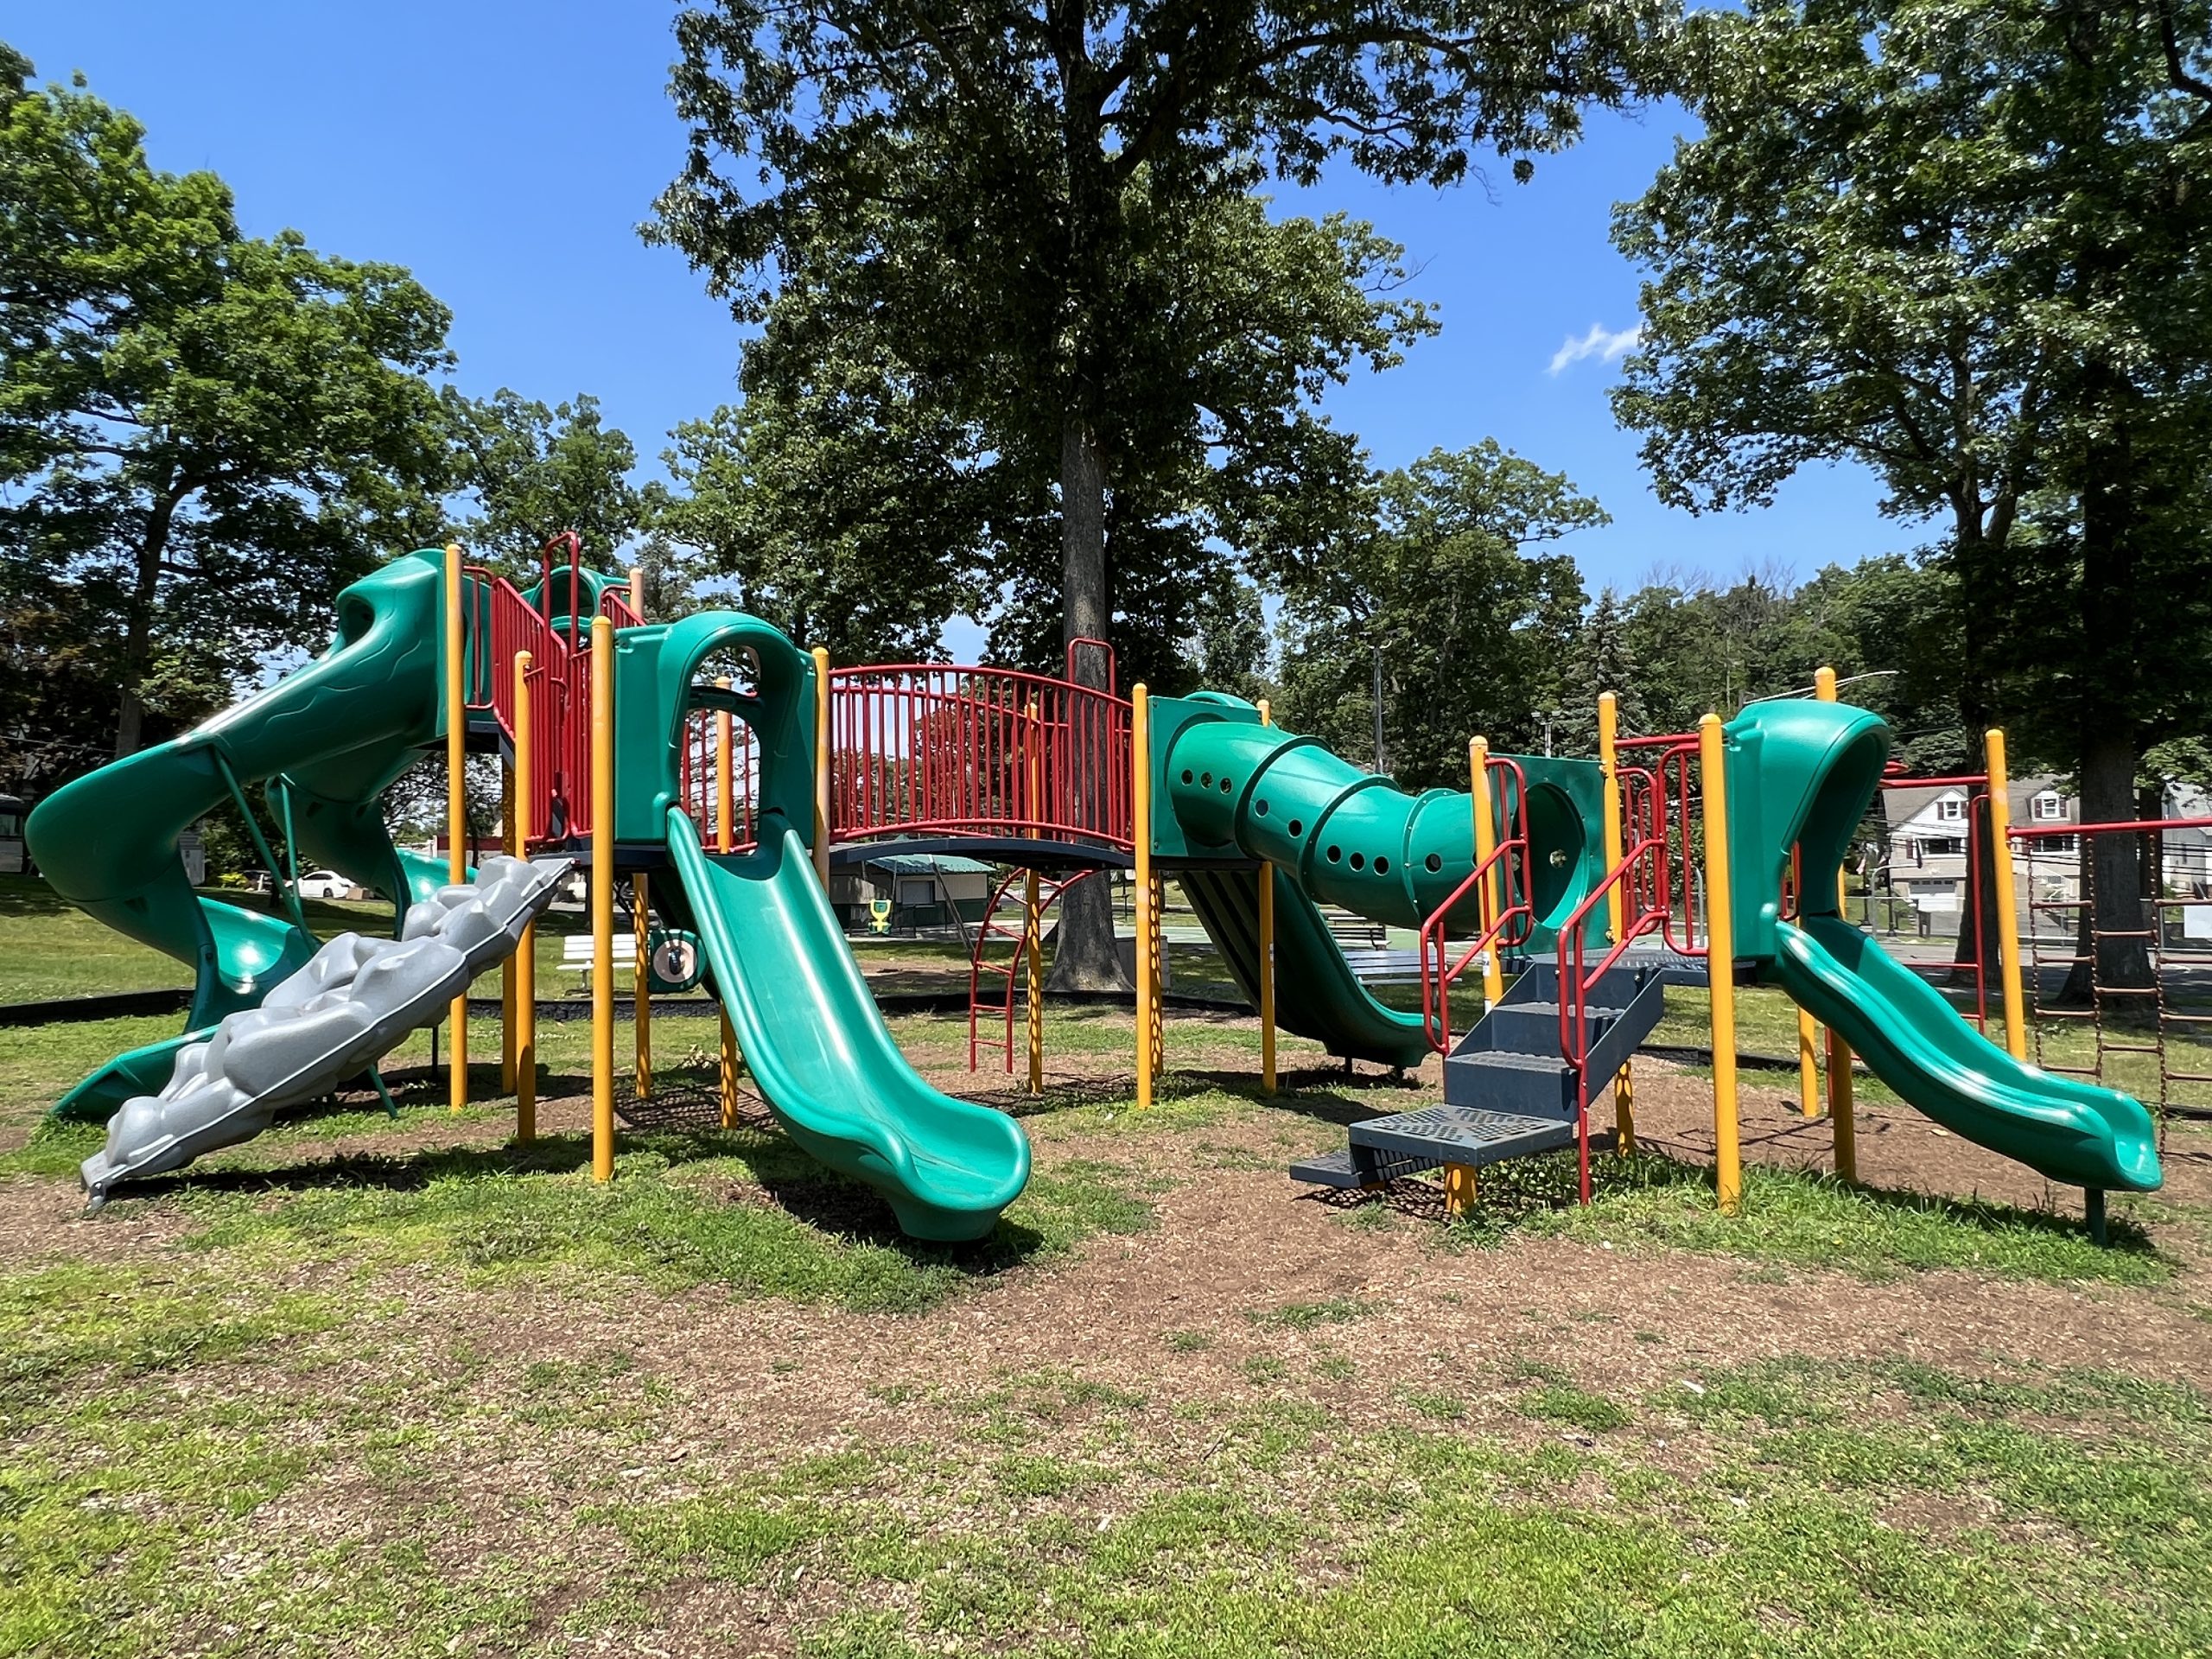 WIDE shot of green structure back view at Modick Park Playground in Hopatcong NJ